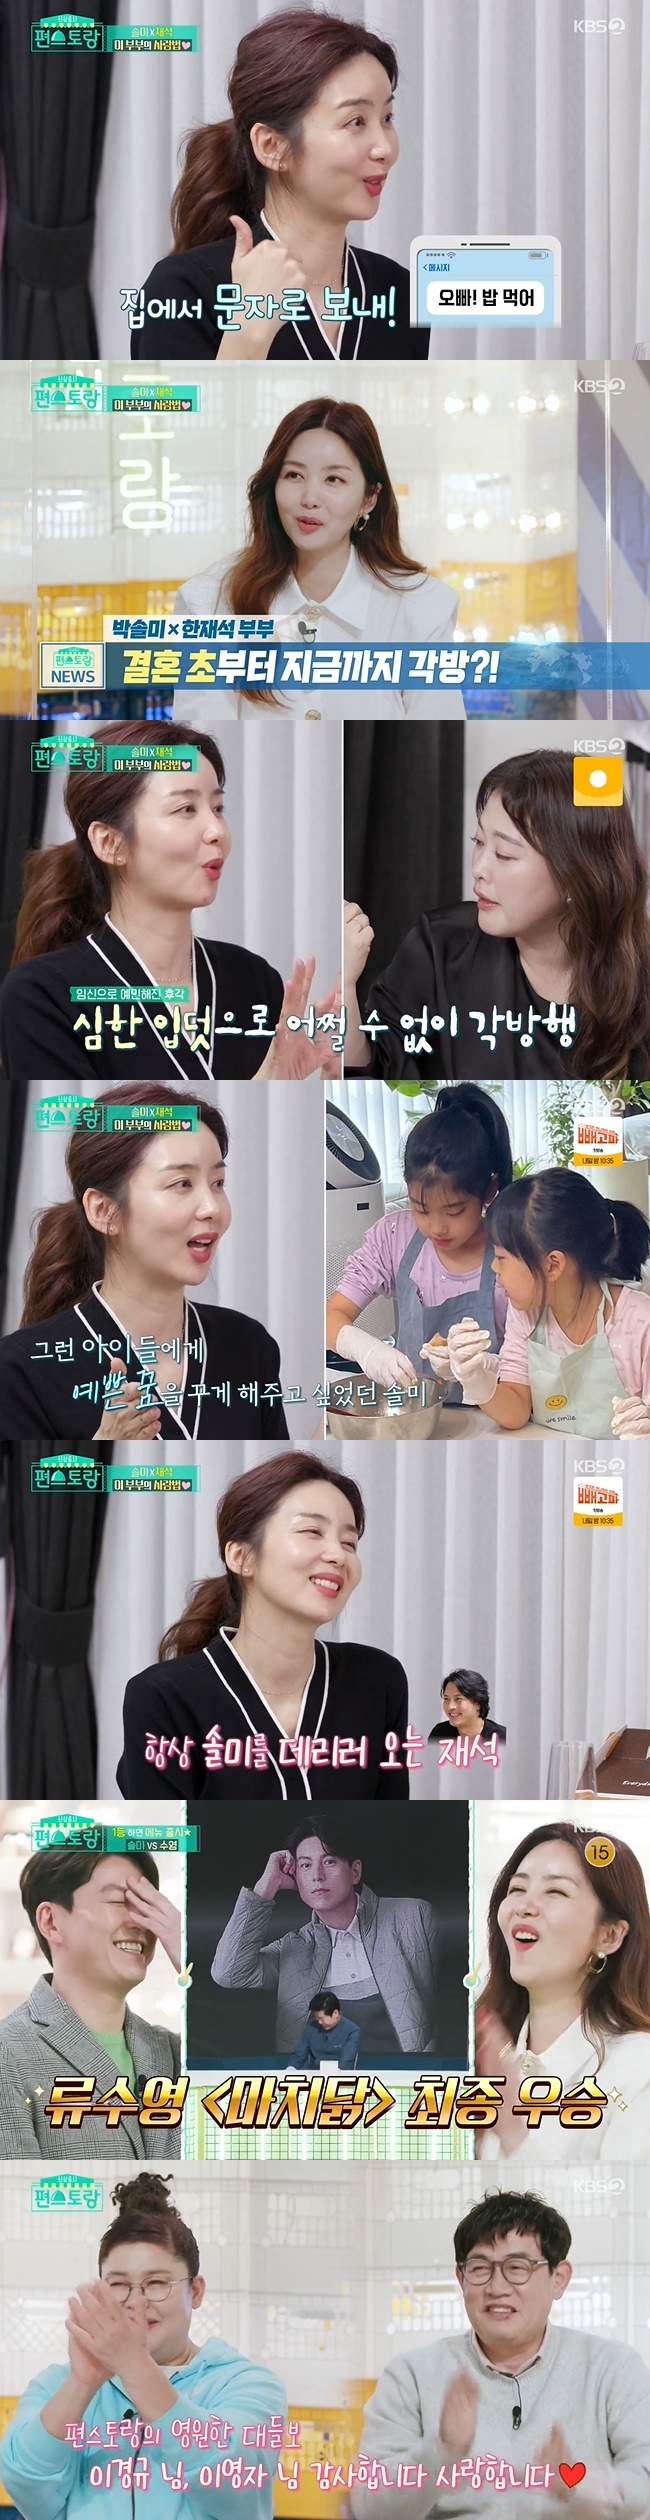 Park Sol-mi has revealed why she has been writing each room with Han Jae-suk since her marriage.On April 29, KBS 2TV Stars from New World Top Recipe at Fun-Staurant, Park Sol-mi invited Shim Jin-hwa and Kim Won-hyo to their home to serve their own food.As soon as he came home, Shim Jin-hwa, who boasted an extraordinary tension, inhaled a dilapidated salad made by Park Sol-mi.Shim Jin-hwa, who first visited Park Sol-mis house, asked her if it was a wedding photo after seeing Park Sol-mis photo while looking around the living room.Park Sol-mi said, I have no wedding photos, only my pictures. I took pictures and didnt get the photo files.I heard from him two years later to get the file, but he didnt answer it.Shim Jin-hwa envied Park Sol-mis constant display of affection in her 11th year of marriage, saying, I have to keep expressing myself. Remember I gave you my homework.I say I love you once a day, Park Sol-mi said, I did it twice and she hummed.Sim Jin-hwa presented a tiger-patterned couple underwear for Park Sol-mi, who was embarrassed by the unexpected intense design and said in the studio, I did not give my husband underwear.I think Ill walk in it, he said, laughing.Kim Wonhyo arrived at the house late, and Park Sol-mi treated the two people with a large Hanwoo flower ribs that tasted with his sweet sauce.During the meal, Shim Jin-hwa revealed the story of Kim Won-hyos gift of 100 million won, which he had collected. Shim Jin-hwa said, We lived with the money that Won-hyo earned.I started making money about the fifth year of my marriage. My money kept saving.On the morning my bankbook was filled with 100 million people, I went to the bank when I opened the bank door and found a hundred million checks, set up a breakfast table and wrote a letter.Kim Won-hyo said, It was very subtle. It was good, but it was burdensome. I did not give 100 million to one billion.I felt grateful and thrilled and responsible. Park Sol-mi explained to the couple who did not hide their affection, We sometimes call them at home, and said that he has been writing various rooms since marriage to Han Jae-suk.Park Sol-mi said, I got pregnant in a month after I got married. My morning sickness was so severe. When my brother passed, I was baro-bad.After that, I had morning sickness because my second child had a Baro, and I was pregnant and gave birth for three to four years, and when I looked back, I thought that (my husband) would have been sad.Ive never talked to her before, she said.In the egg-themed confrontation, Park Sol-mi showed egg-shell, Lee Kyung-kyu made with yolk, Park Hana showed hot honeyscatch egg, Ryu Soo-young showed chicken with mara red pepper sauce, Tiger skin egg with garlic mayo sauce and tortia.Ryu Soo-young won the championship from chefs with the evaluation that Ryu Soo-young is a chef who pretends to be an actor and source is attractive.On the other hand, news of Lee Kyoung-kyu and Lee Young-ja getting off the show with the program was reported from the start of Stars Top Recipe at Fun-Staurant.Lee Young-ja seems to have become younger during Stars Top Recipe at Fun-Staurant.I was so happy and thankful for the love of viewers because of Stars Top Recipe at Fun-Staurant, and Lee Kyoung-kyu said, I tried hard.I thank you for your love. I have 10 products. Buy a lot of them. 